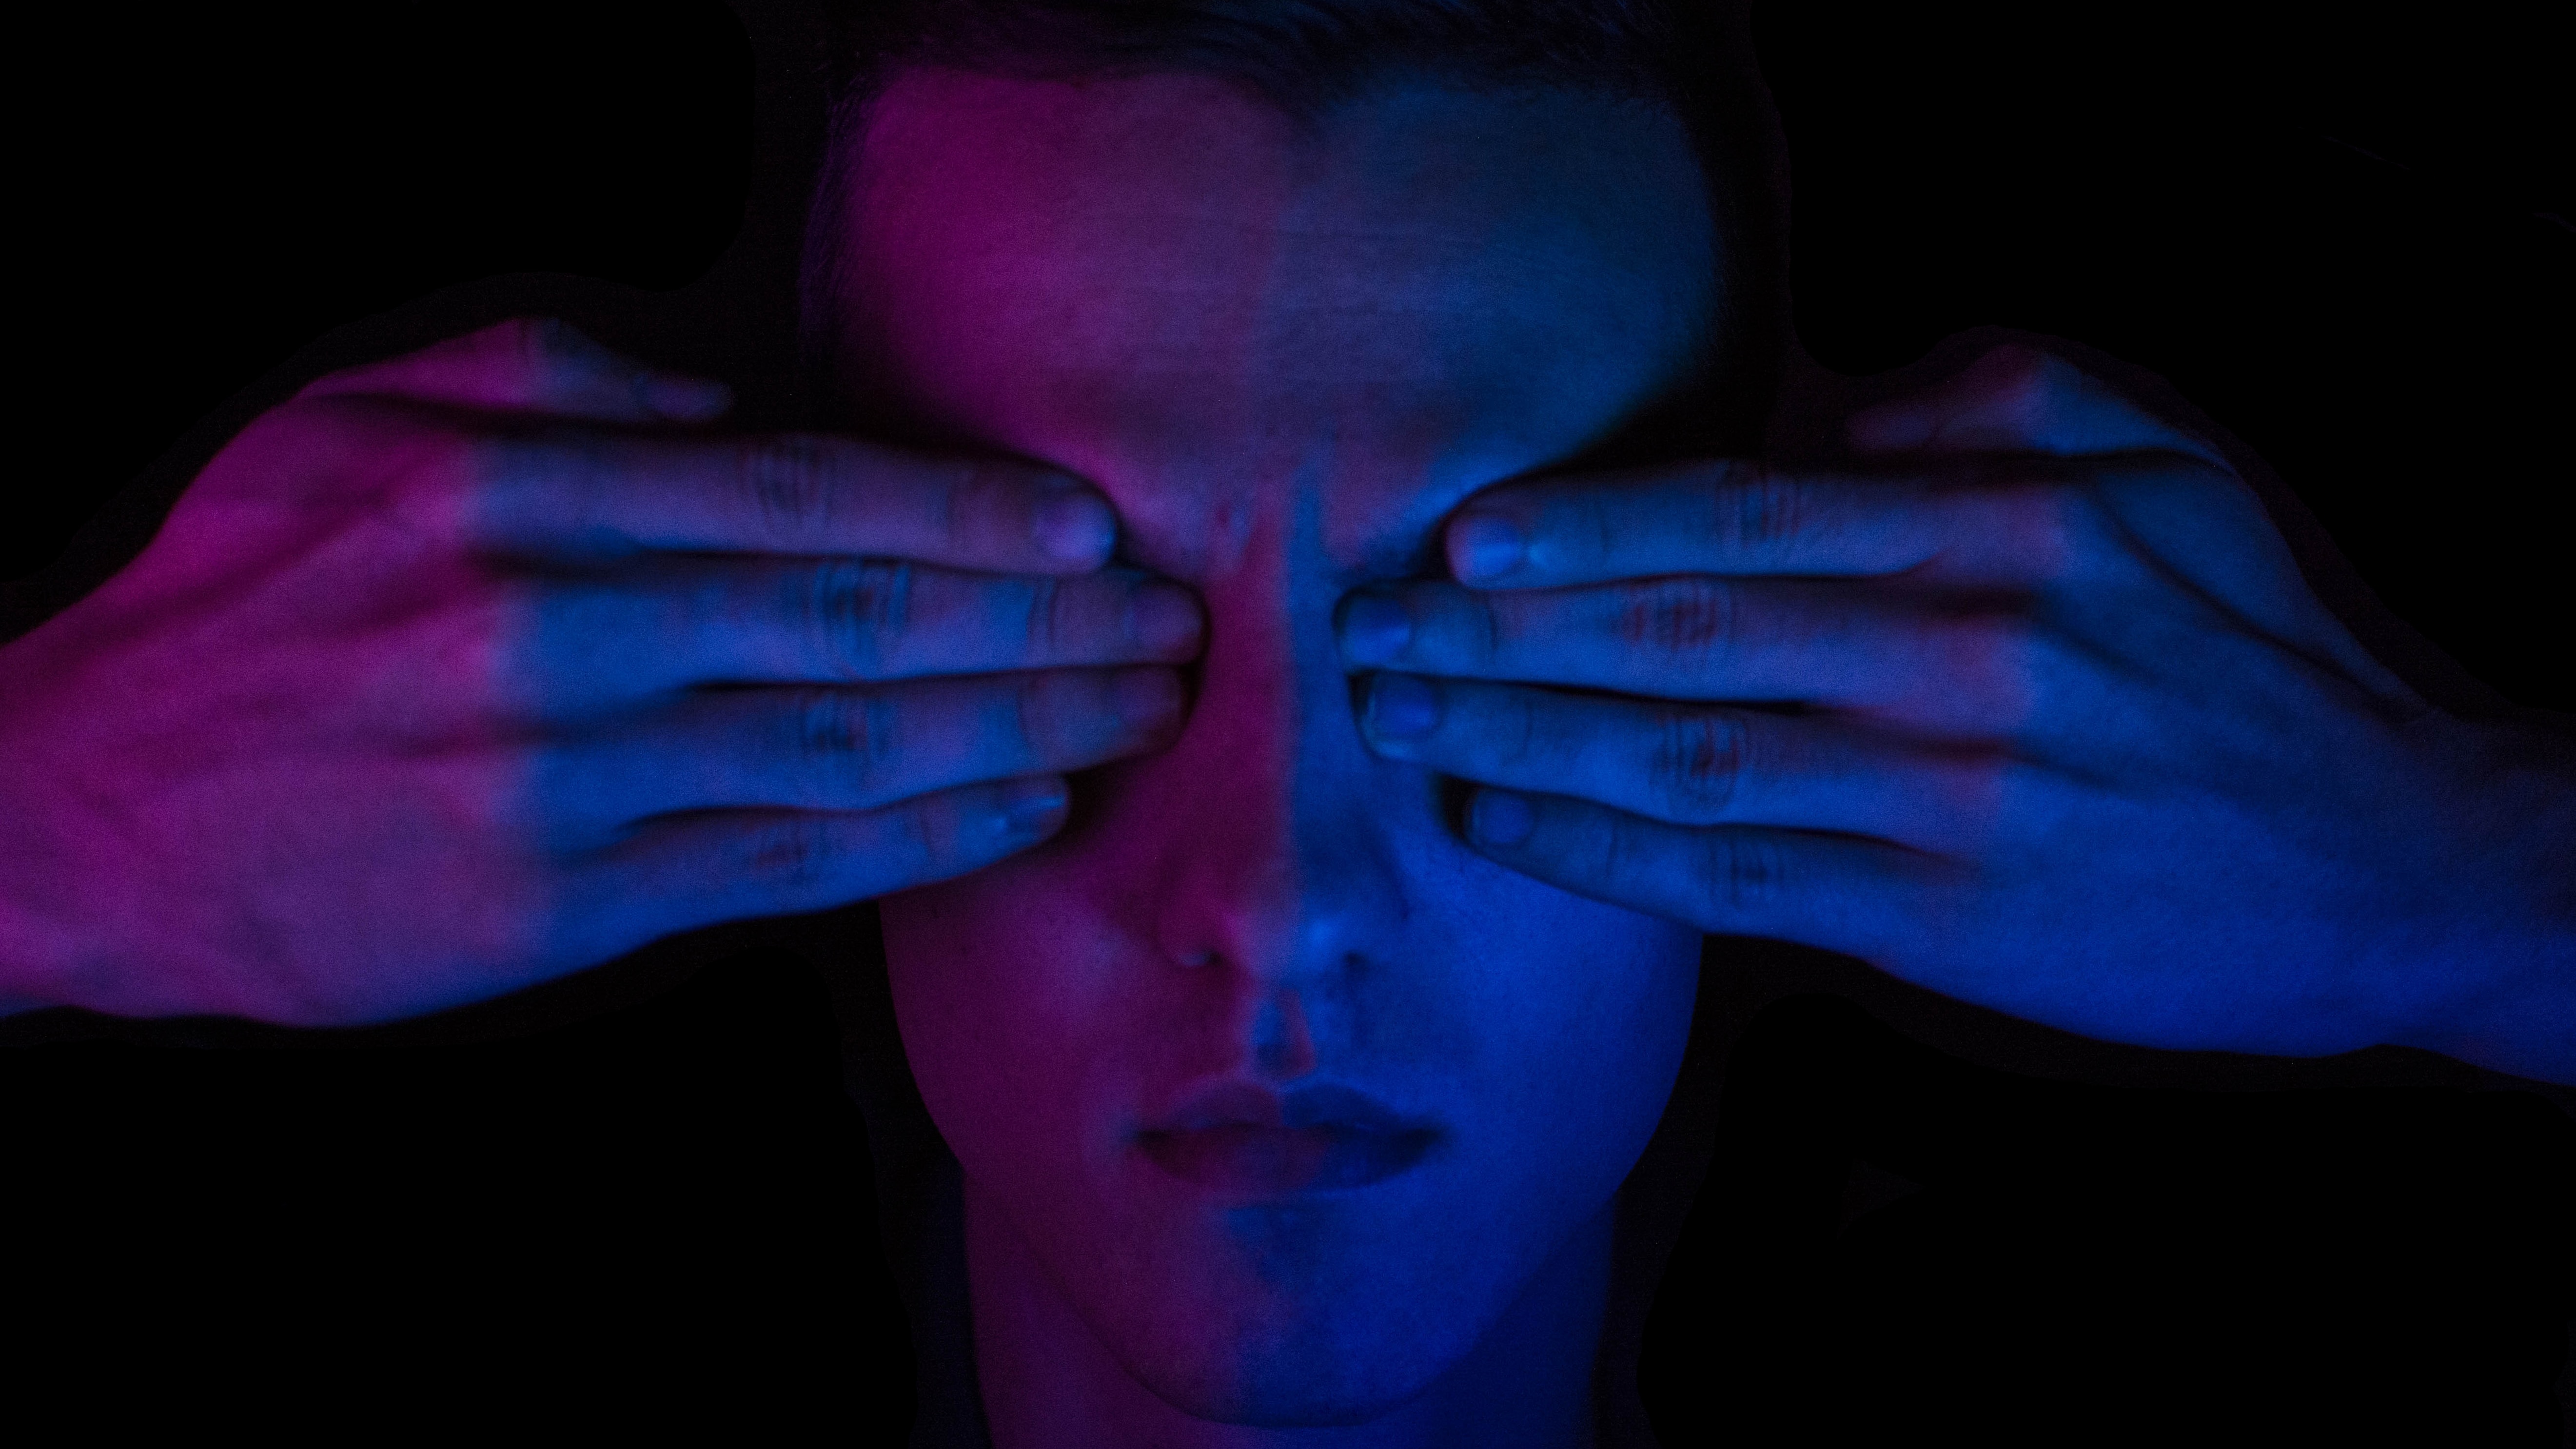 close-up of a man's face with his eyes covered illuminated with blue and purple lights.